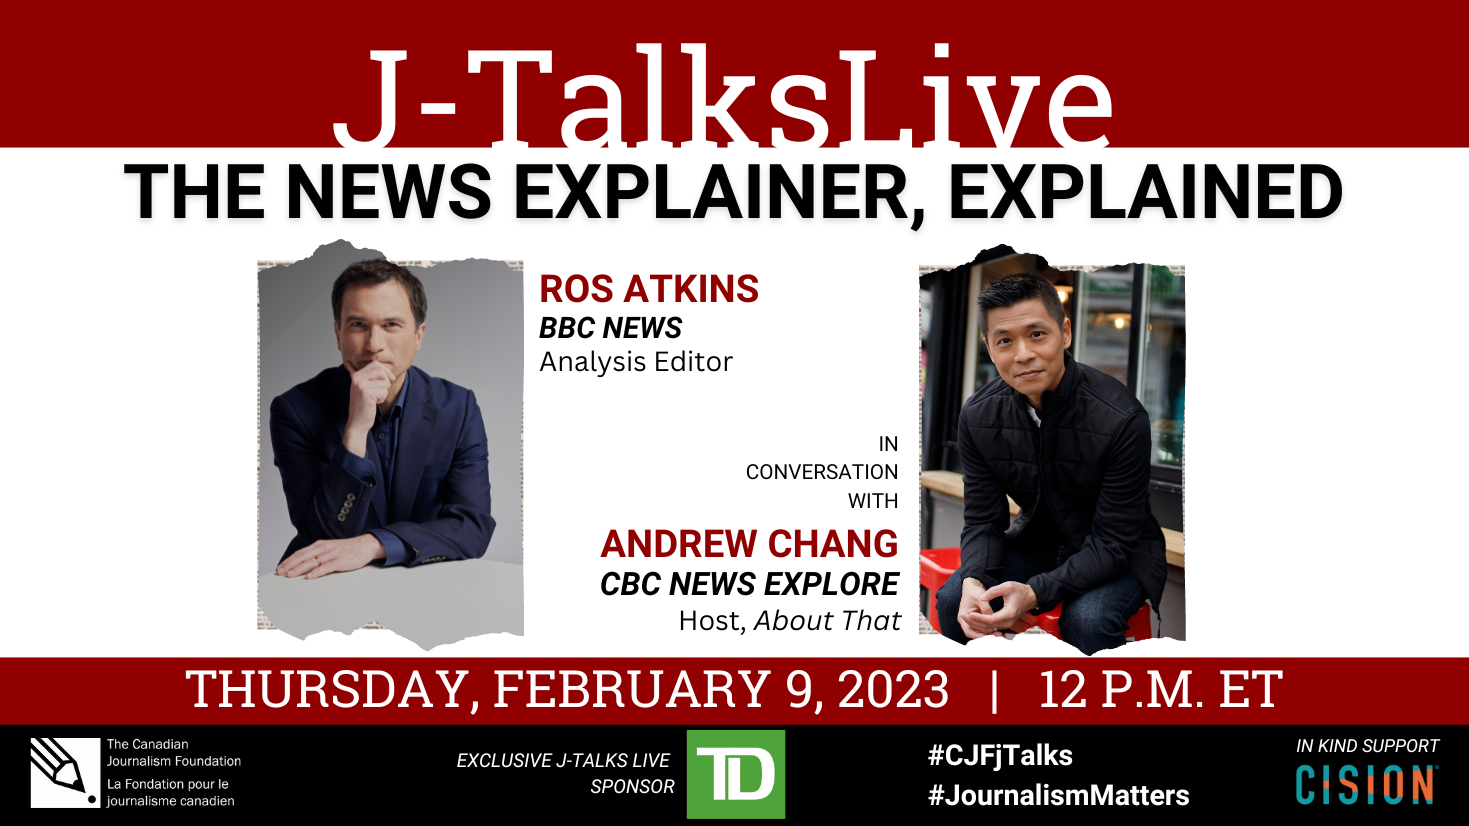 J-TalksLive THE NEWS EXPLAINER, EXPLAINED Ros Atkins, BBC News Analysis Editor in conversation with Andrew Chang, CBC News Explore, Host, About That Thursday, February 9, 2023, 12 PM ET